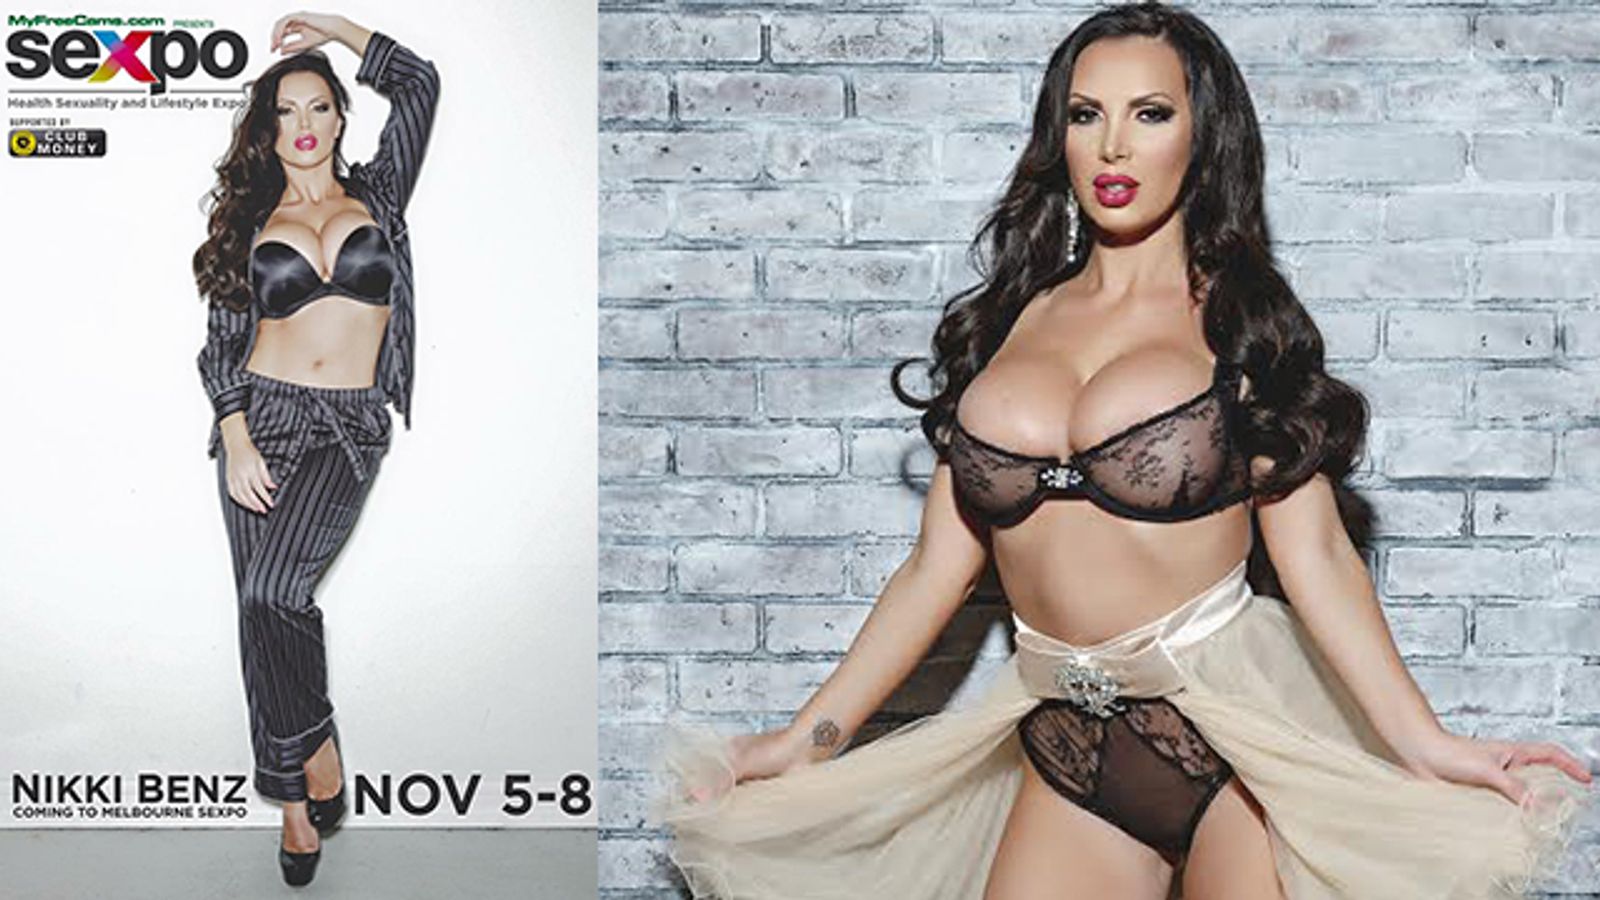 Nikki Benz Appearing At Sexpo Melbourne In Australia This Week